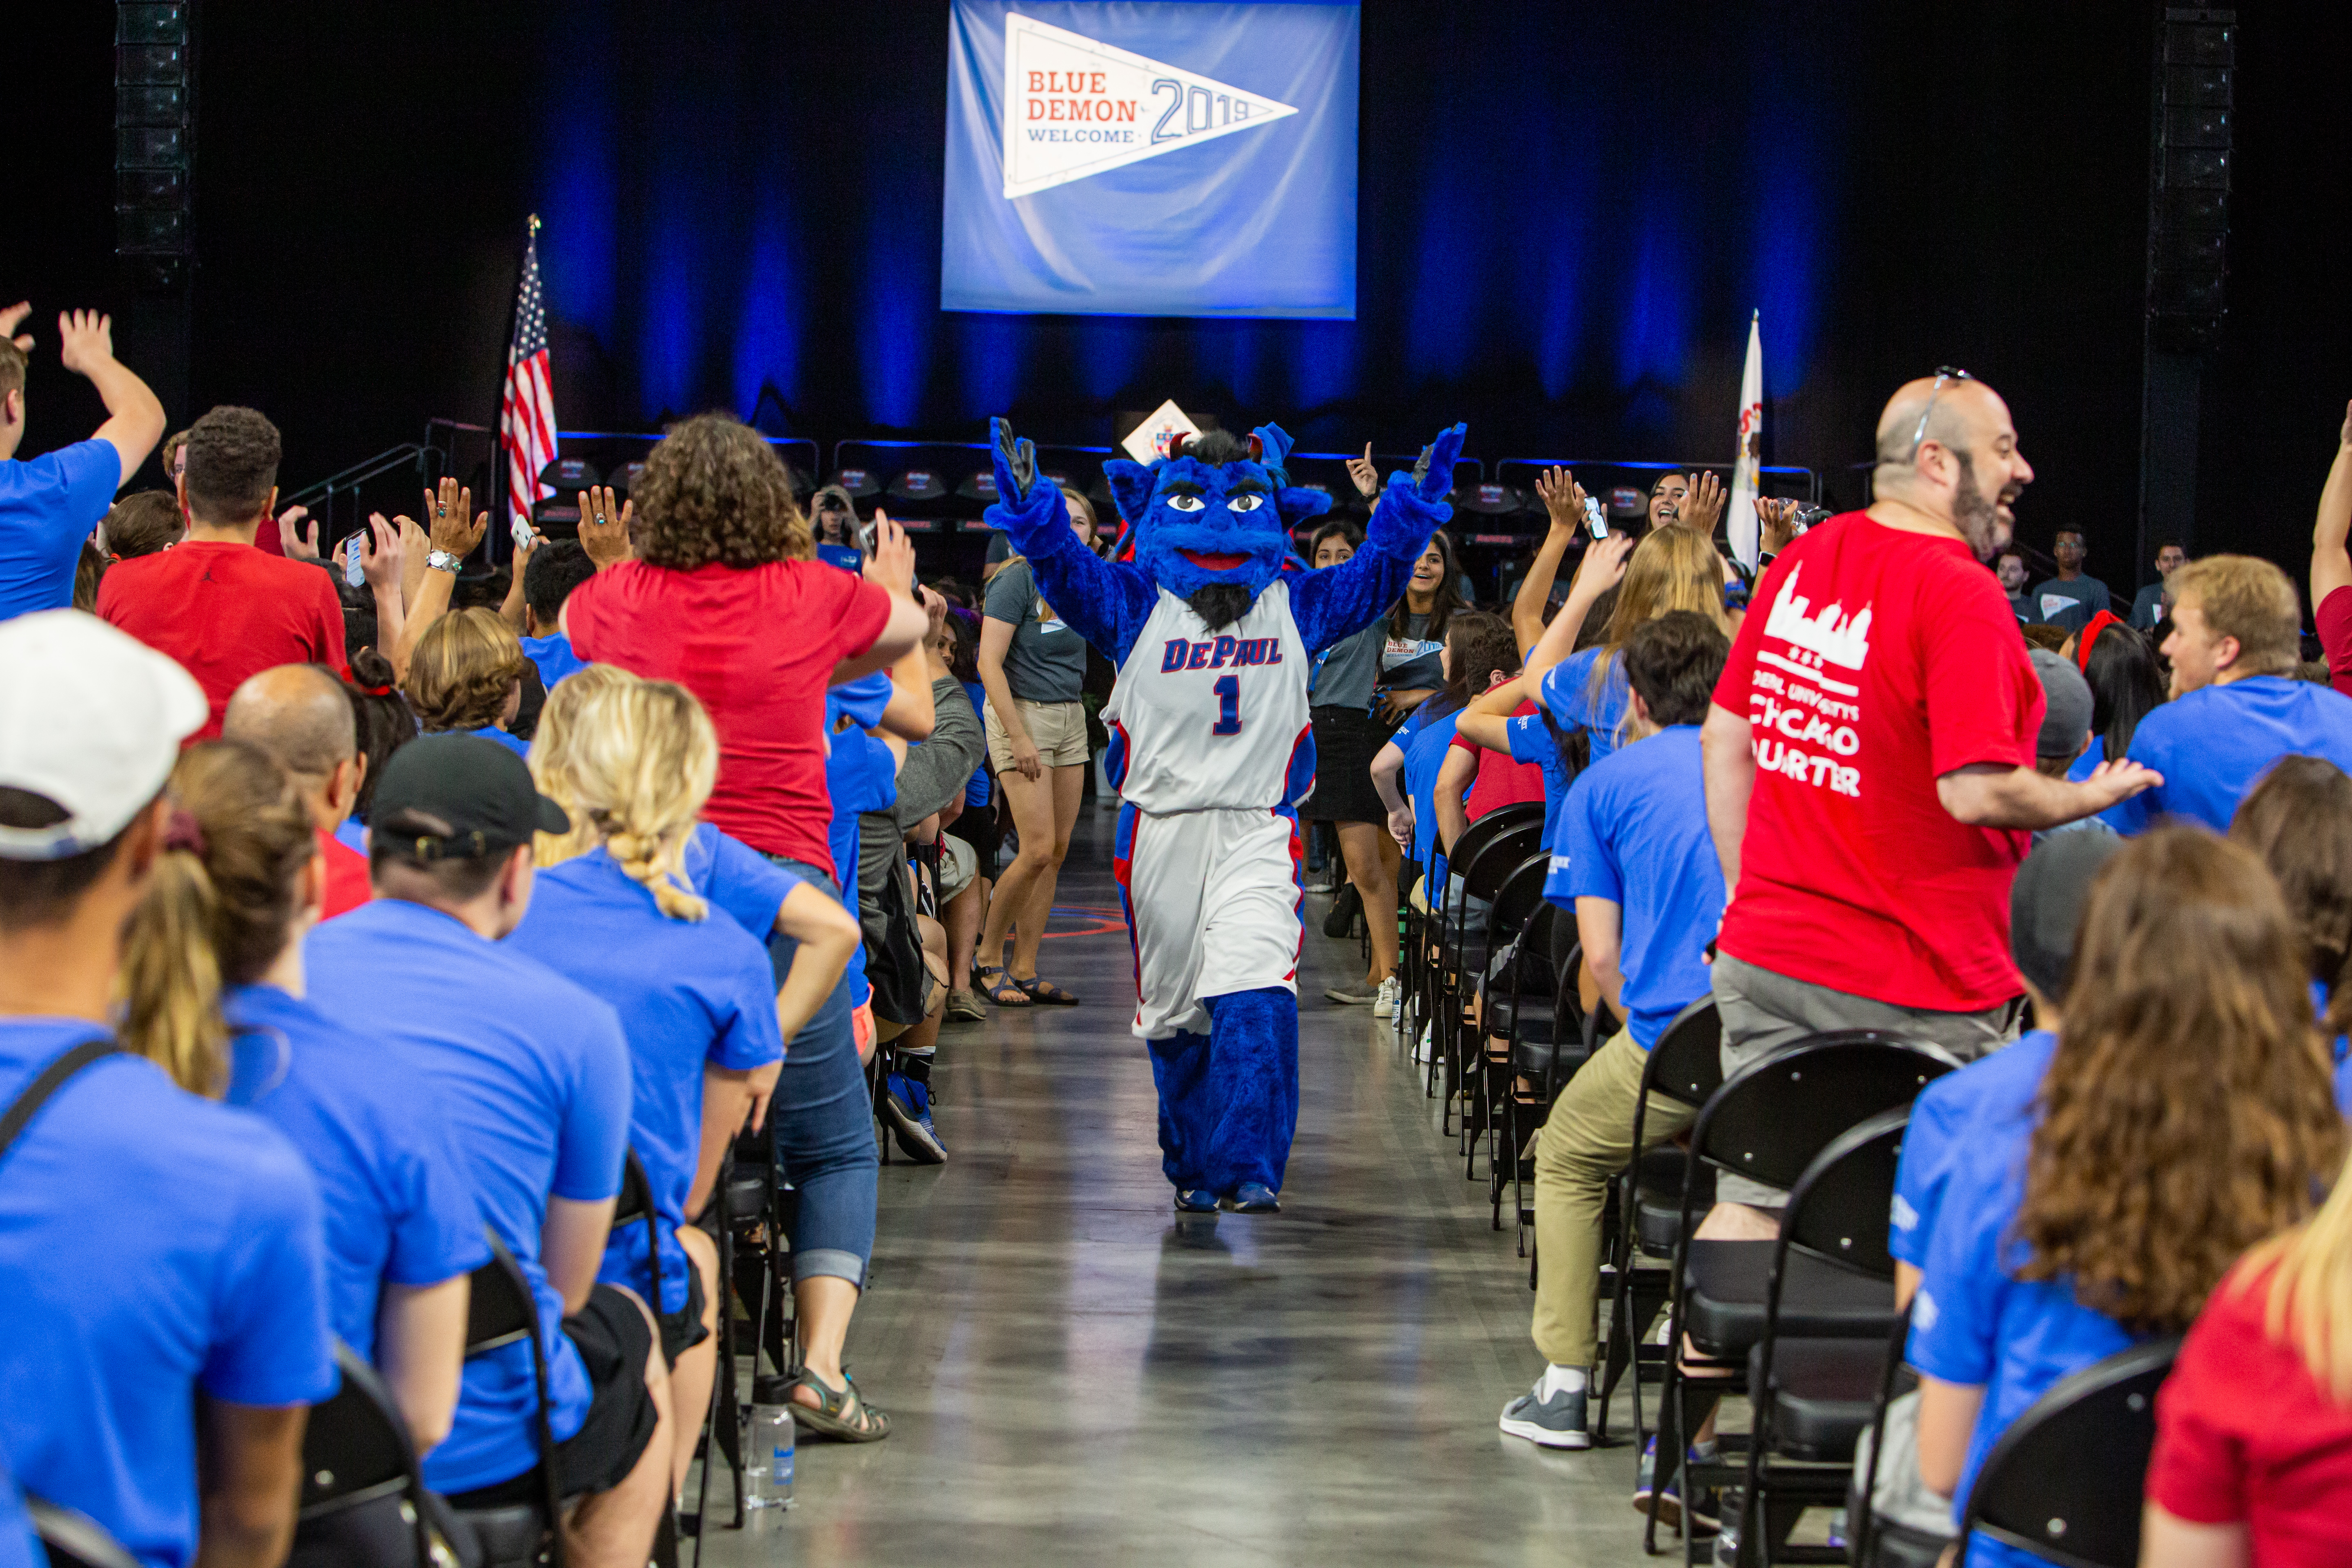 DePaul's first new student convocation, the Blue Demon Welcome, took place on Sept. 10 at Wintrust Arena. (DePaul University/Randall Spriggs)